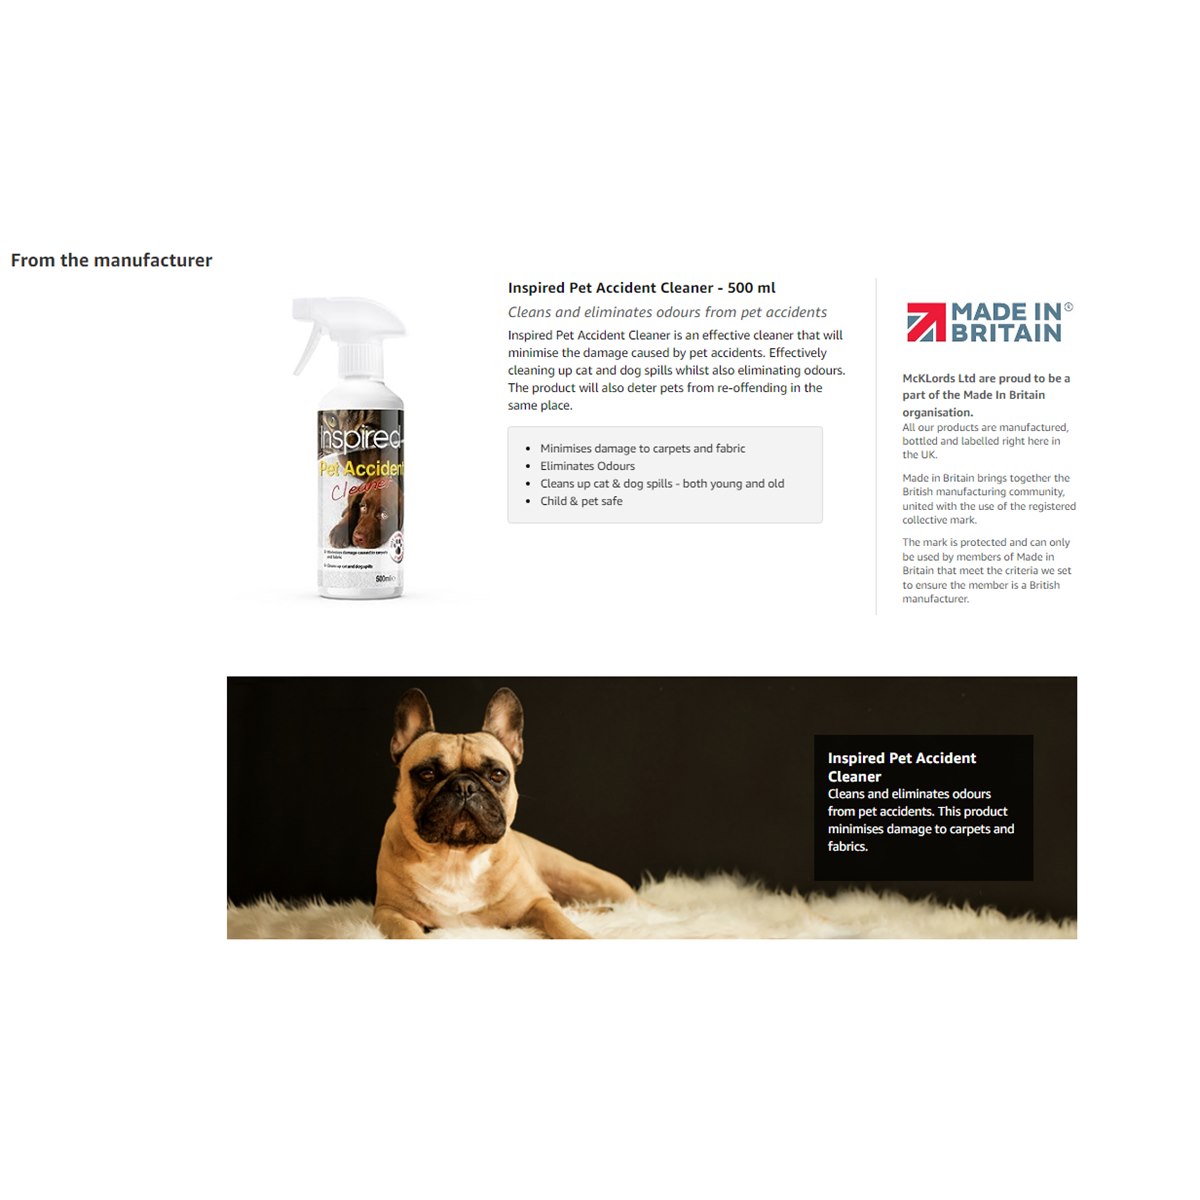 Inspired Pet Accident Cleaner Usage Instructions